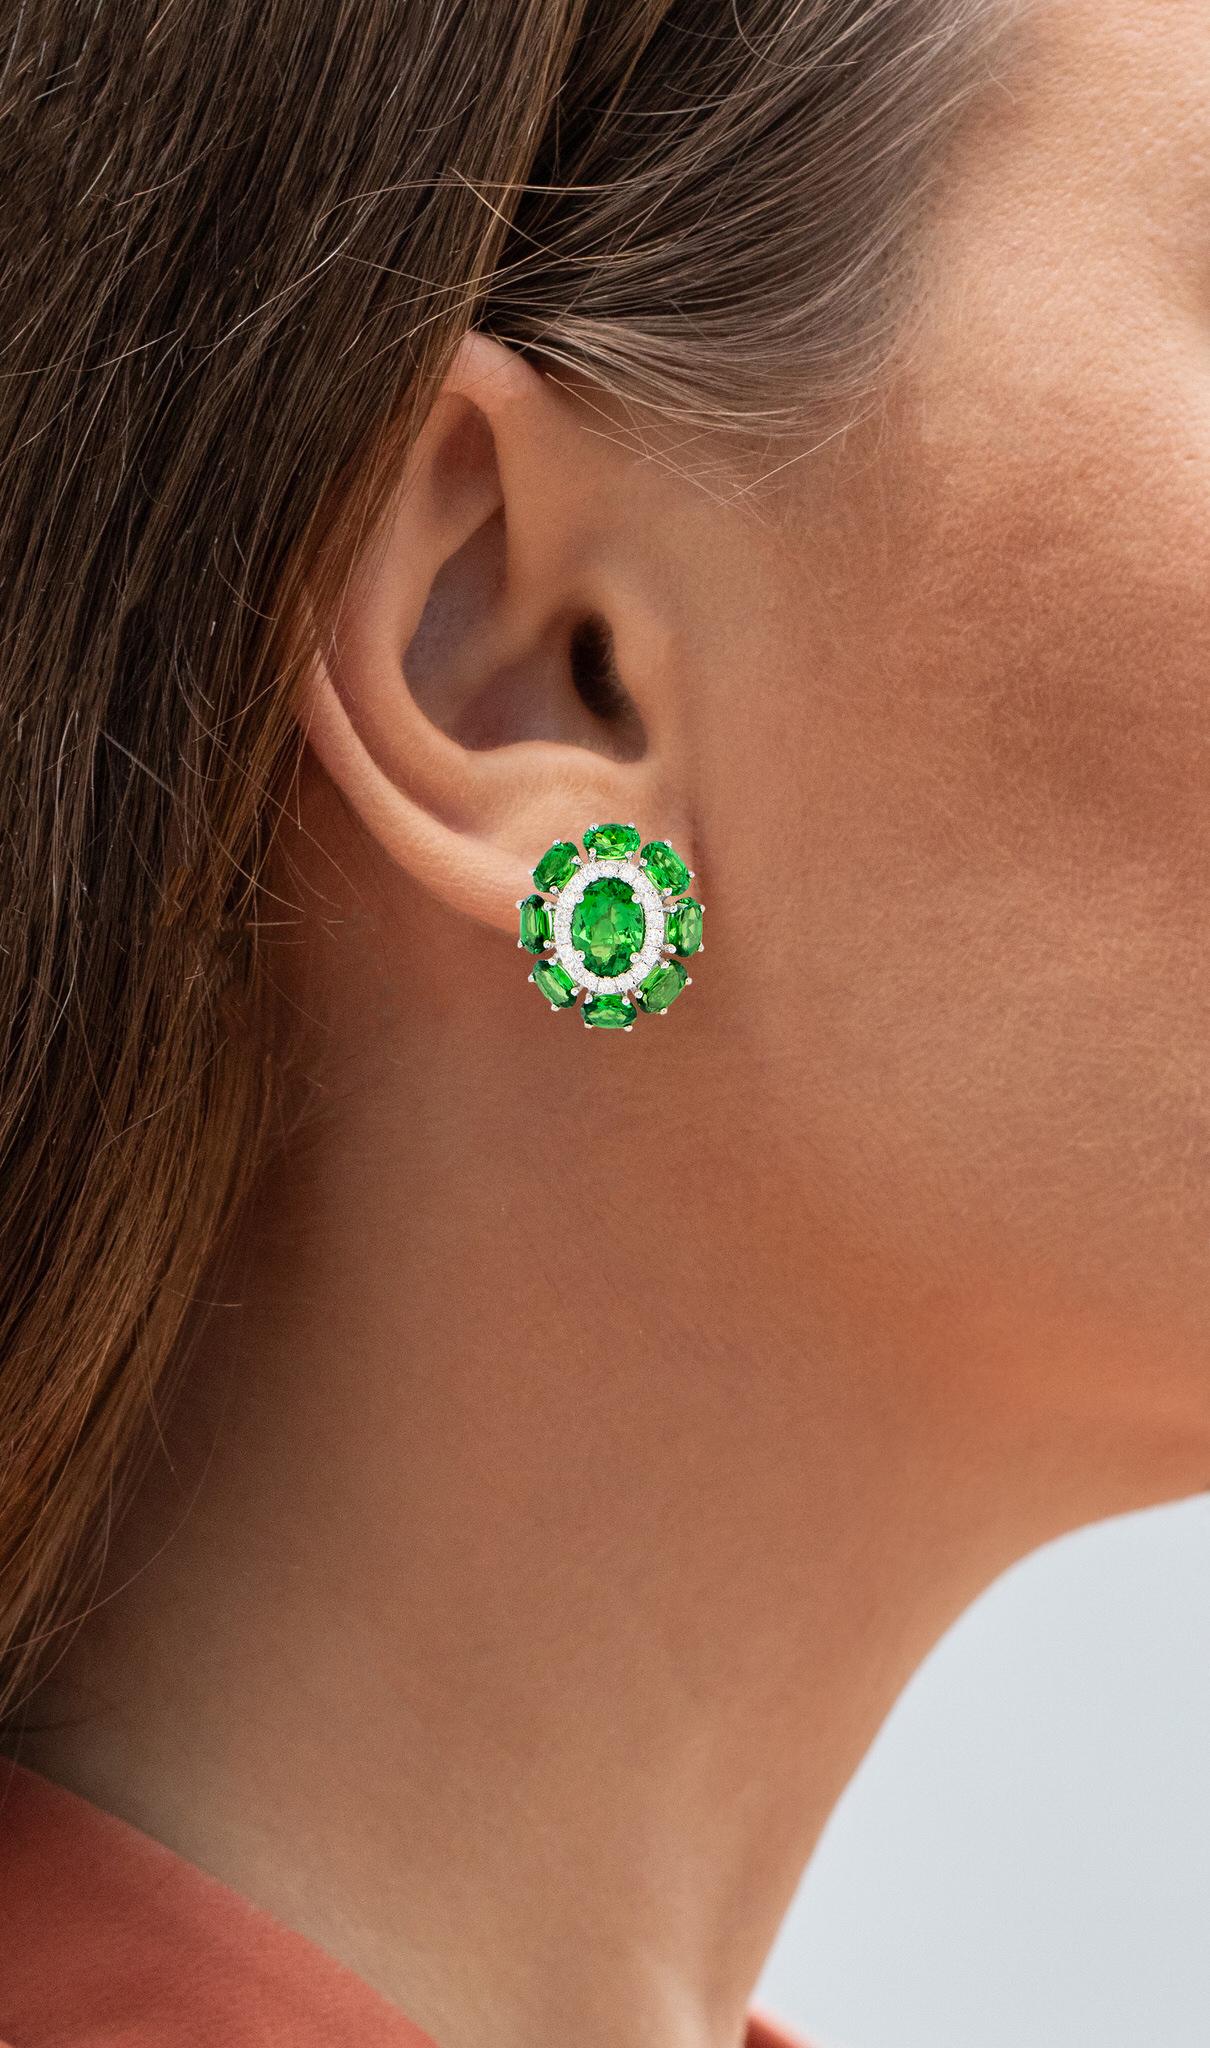 It comes with the Gemological Appraisal by GIA GG/AJP
All Gemstones are Natural
Tsavorites = 6.90 Carats
Diamonds = 0.43 Carats
Metal: 18K White Gold
Dimensions: 17.5 x 15.5 mm